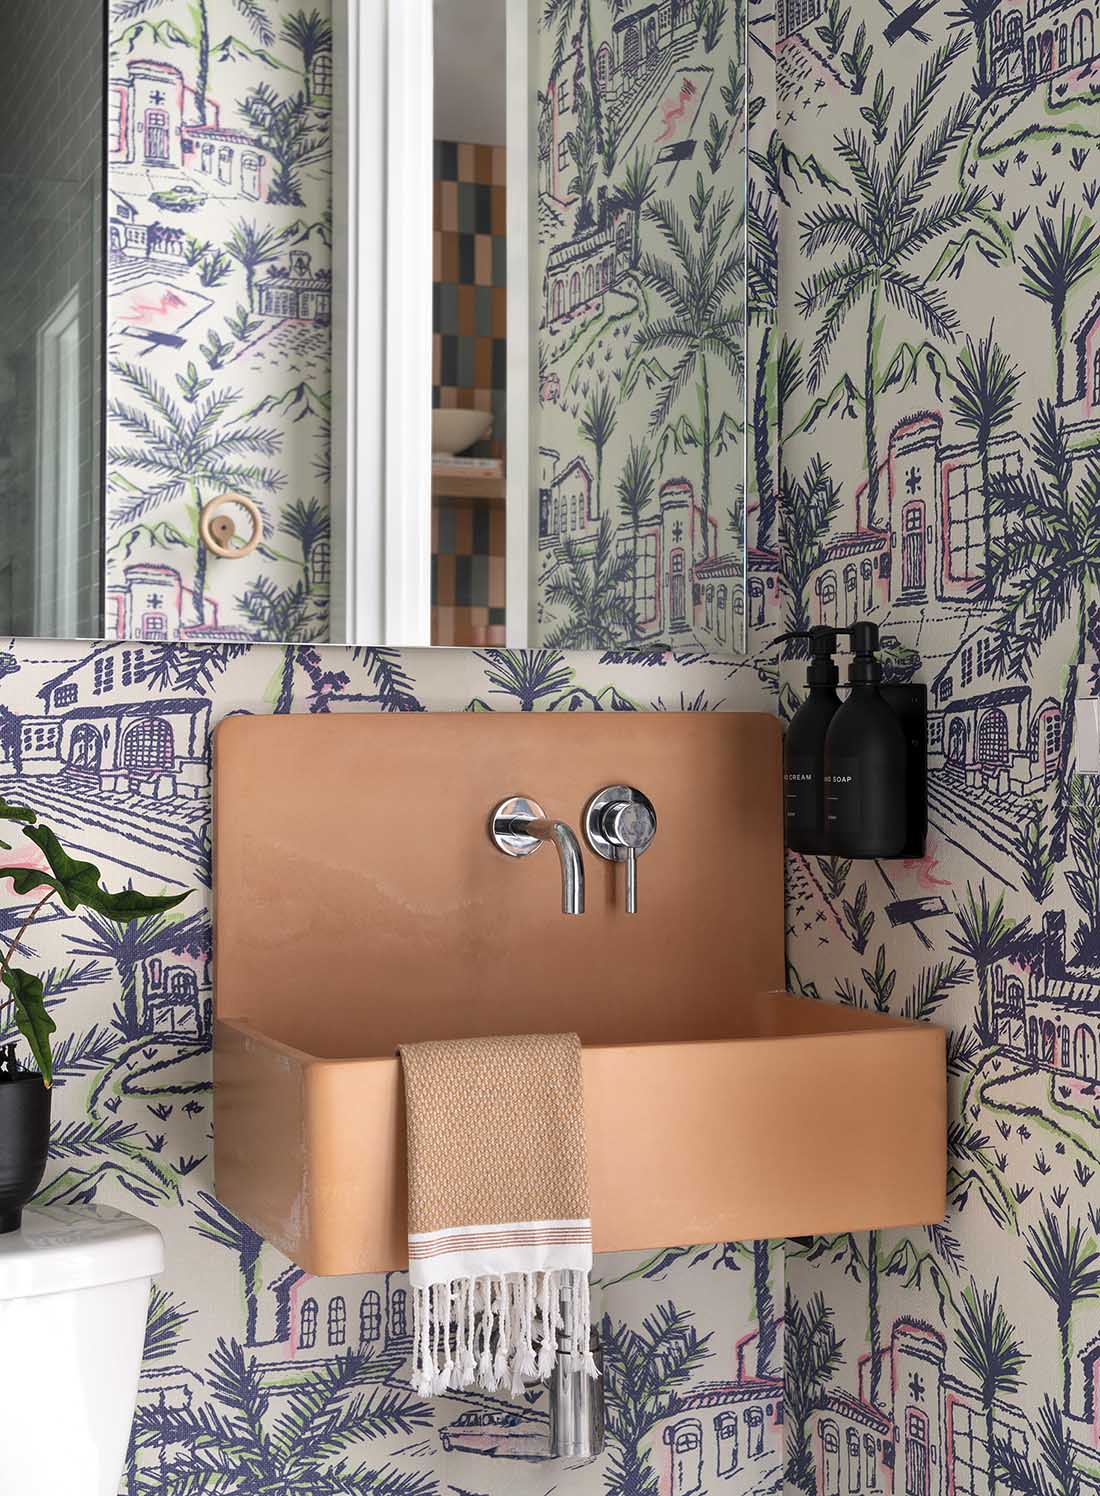 printed-grasscloth-wallpaper-by-sunday-social-capwells-castle-in-pool-guest-bath-by-tribe-design-ryann-ford-phot